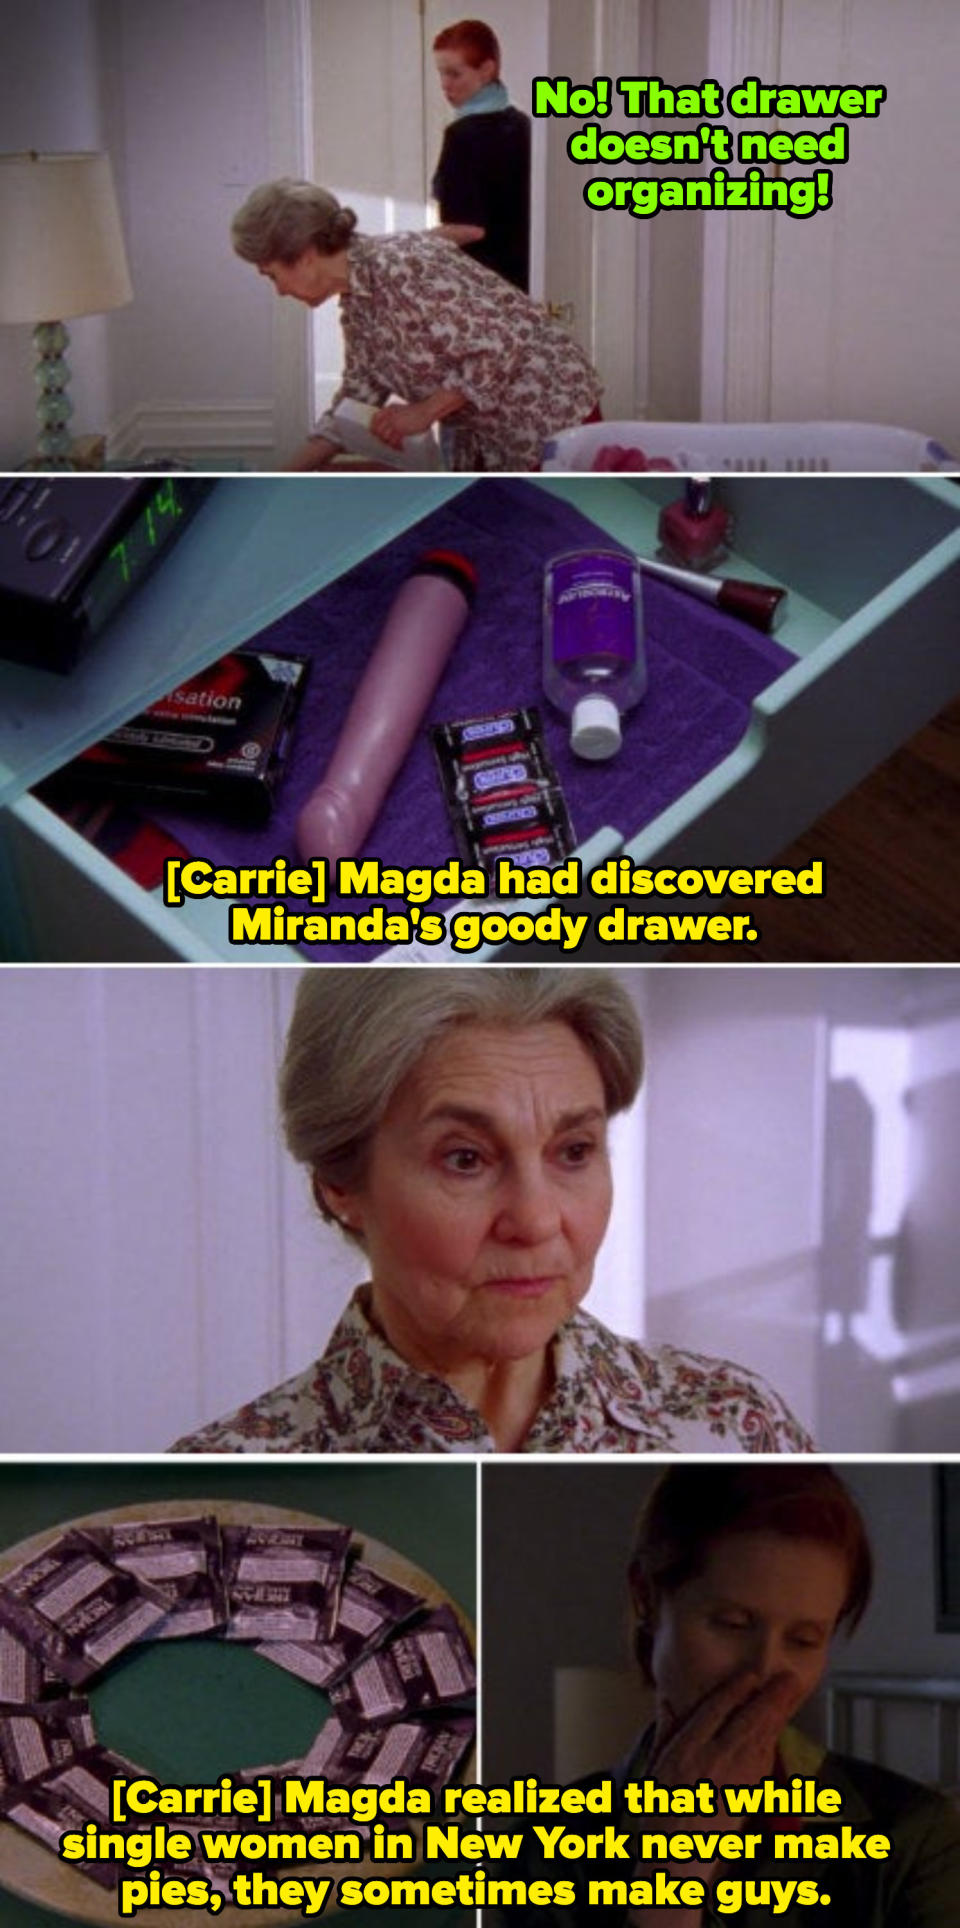 Magda appalled by Miranda's nightstand drawer filled with a vibrator and condoms; at the end of the episode, Miranda discovering a plate of condoms in her nightstand arranged by Magda